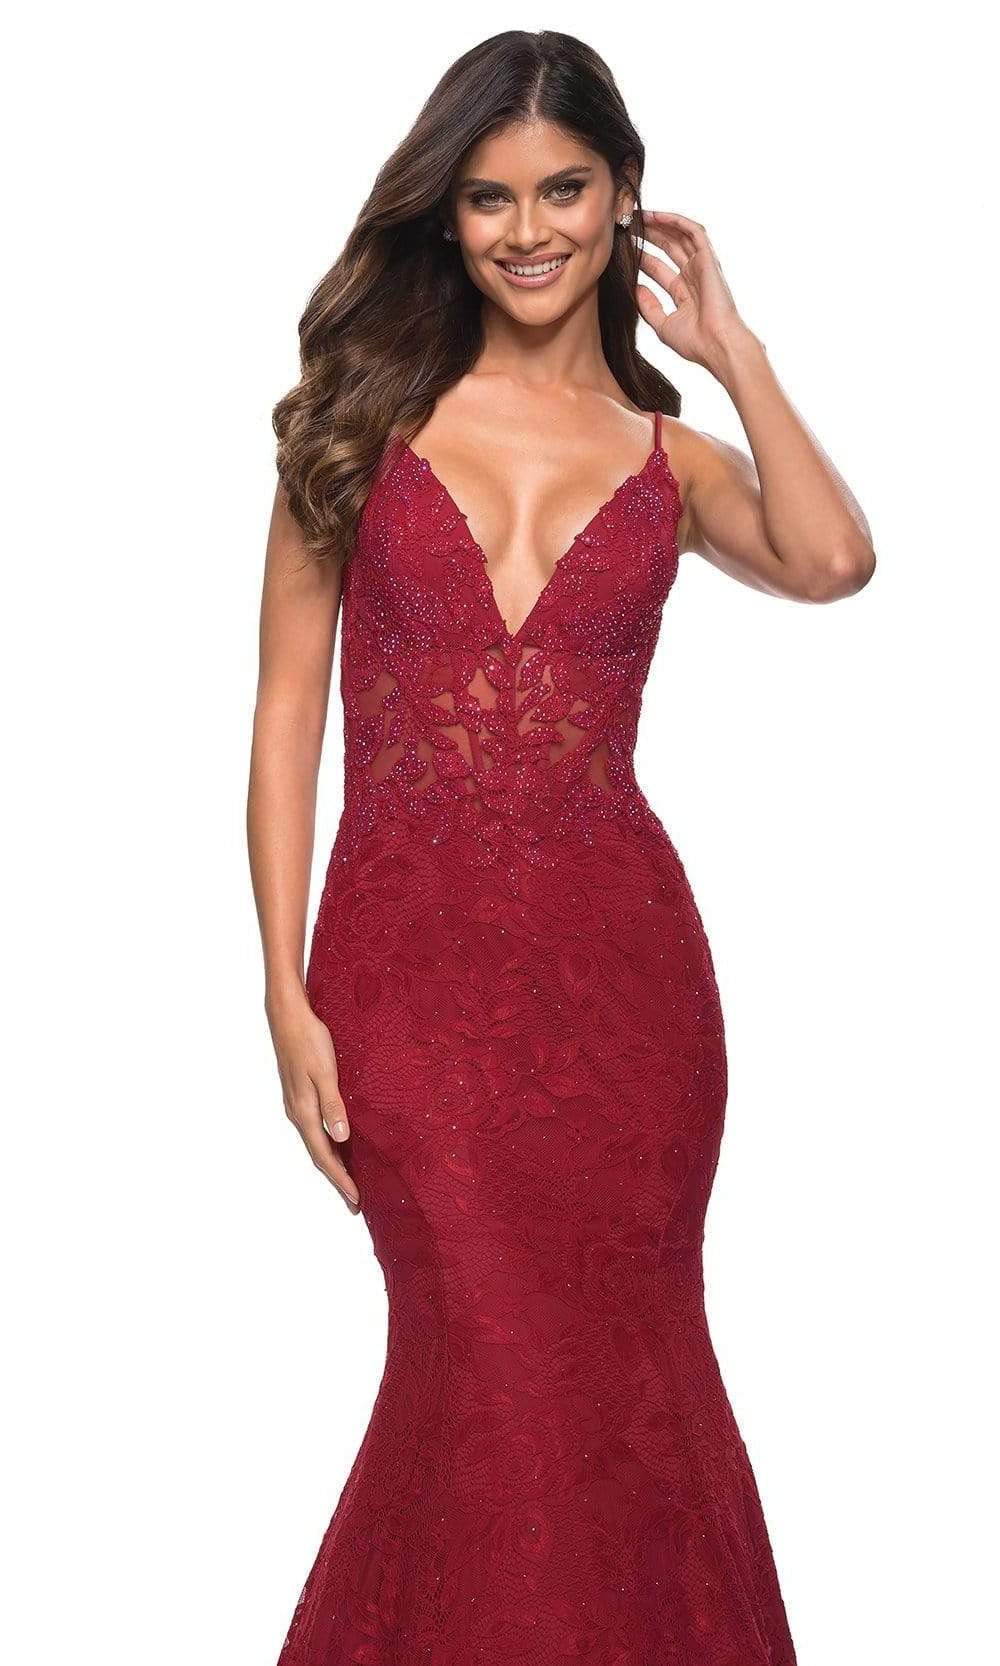 La Femme - 30320 Spaghetti Strap Lace Mermaid Gown Special Occasion Dress